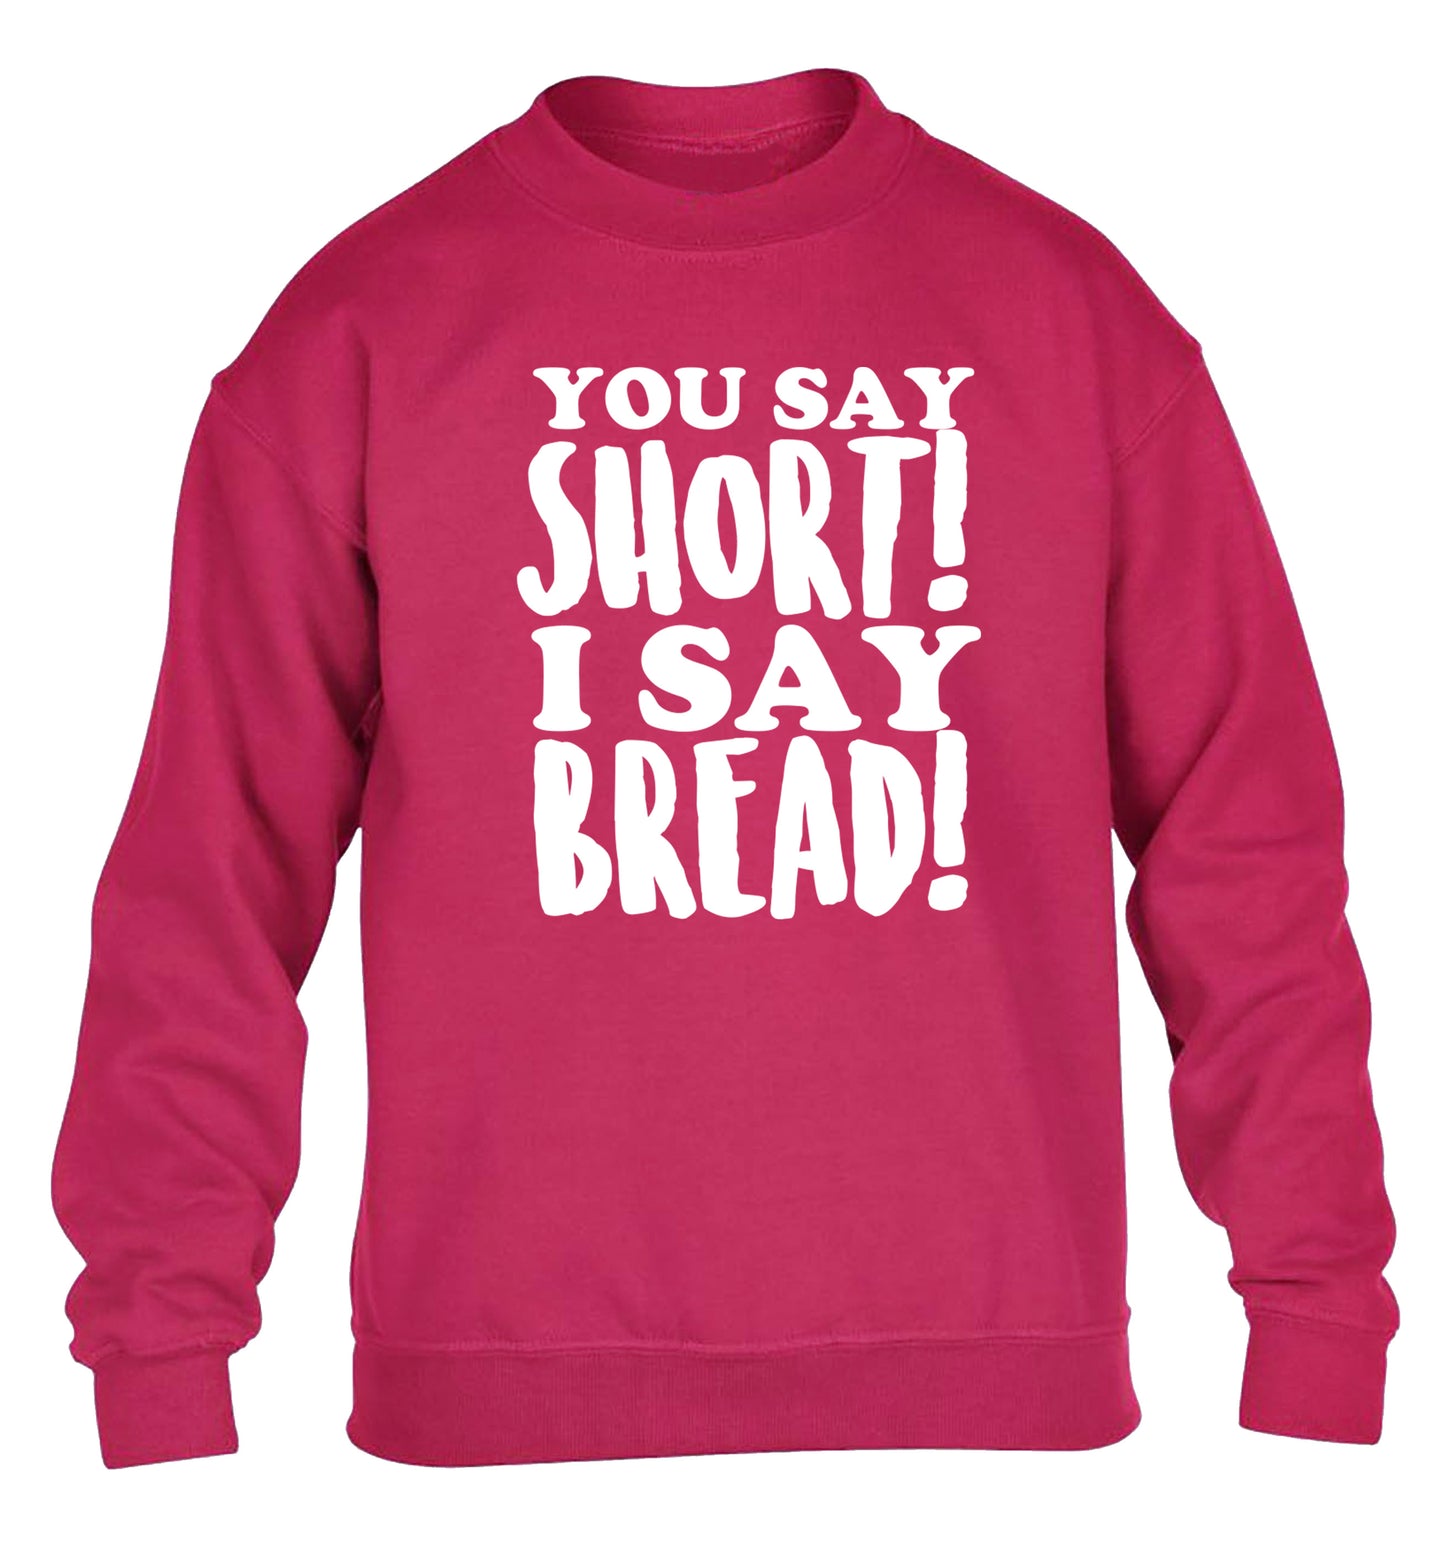 You say short I say bread! children's pink sweater 12-14 Years